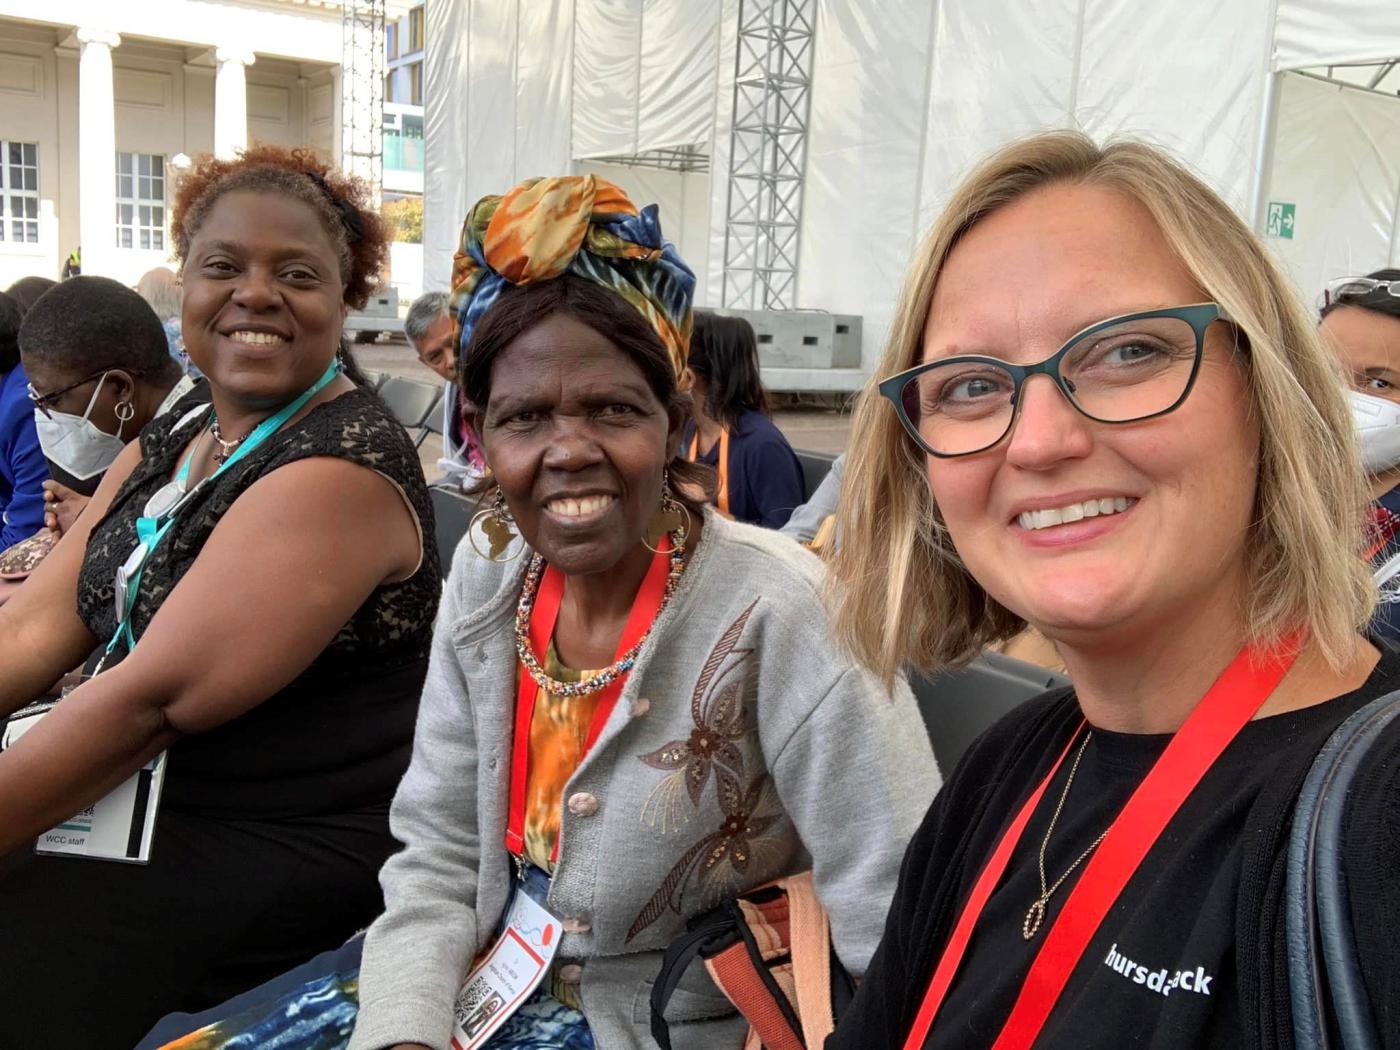 Kathryn Lohre (right) with Rev. Nicqi Ashwood (left), WCC Program Executive of the Just Community of Women and Men, and Dr Agnes Abuom (center), former moderator of the WCC Central Committee, Photo: Courtesy of Kathryn Lohre